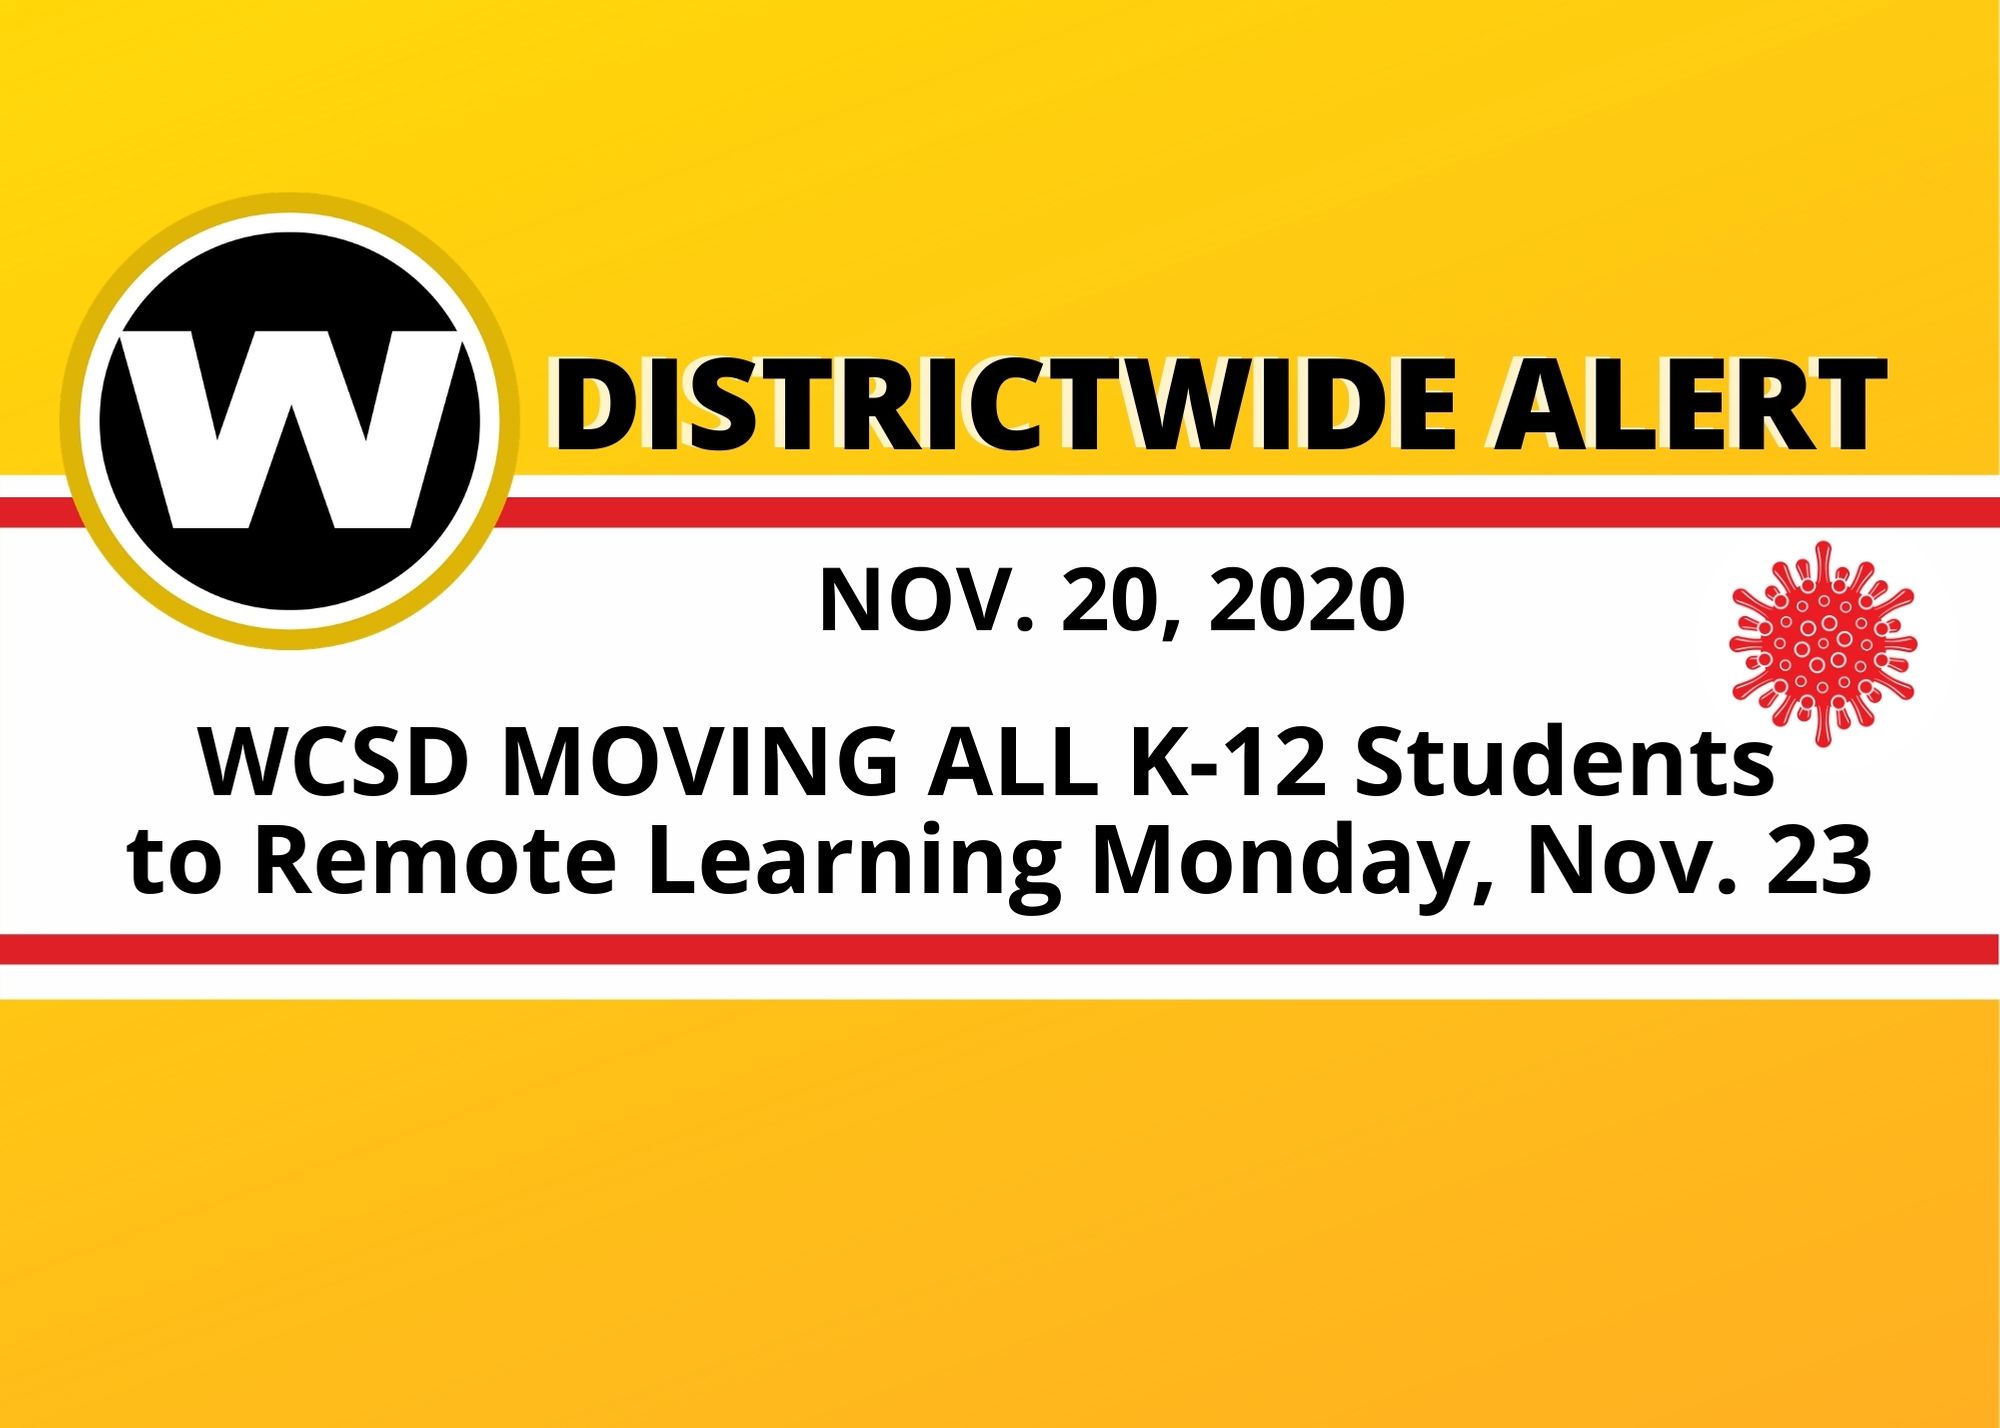 WCSD Moving ALL K-12 Students to Online Learning